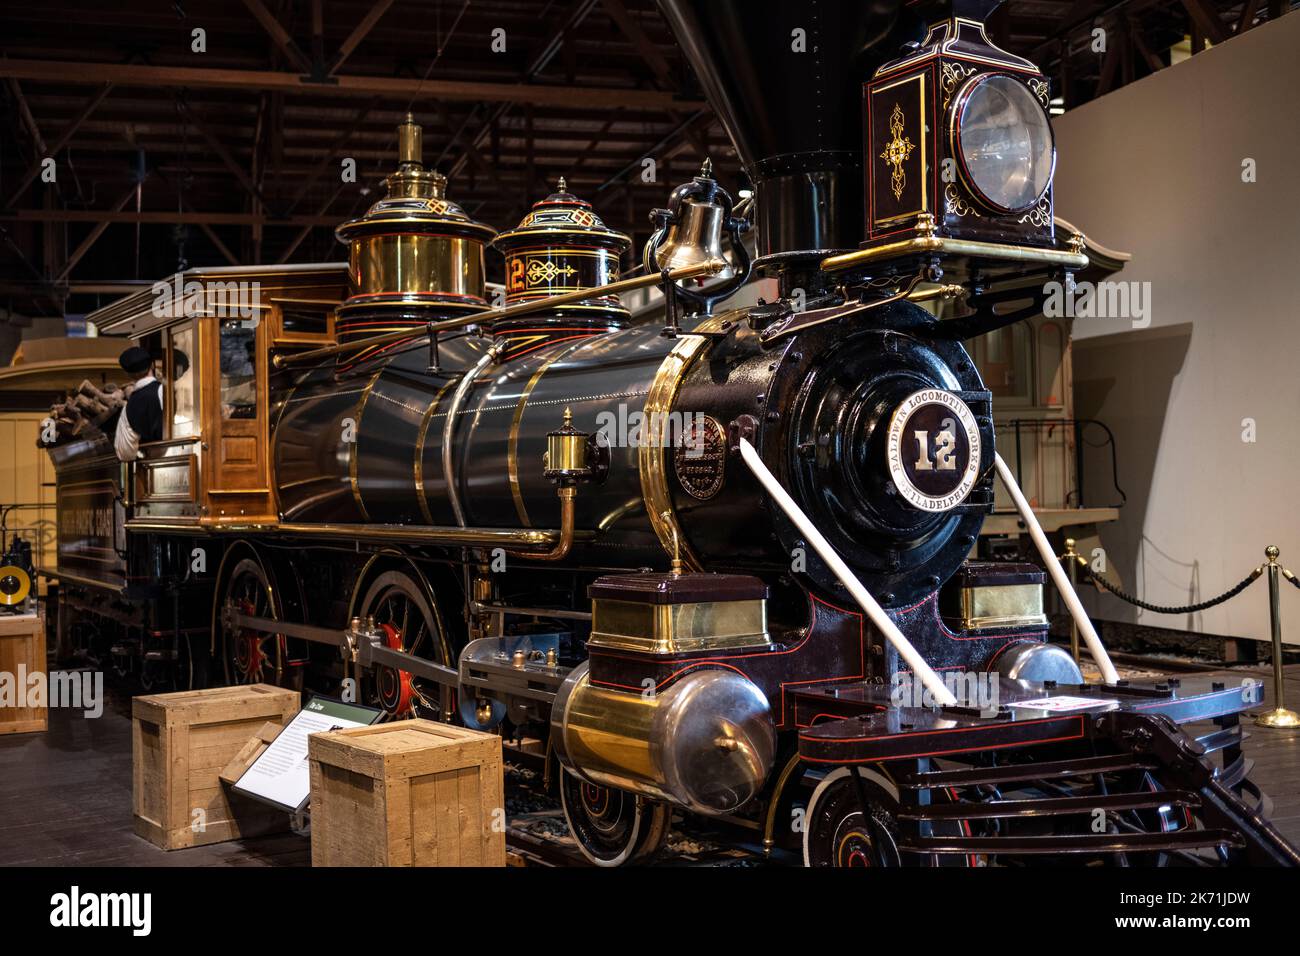 North Pacific Coast Railroad Locomotive number 12 in operation from 1880 to 1940. Stock Photo